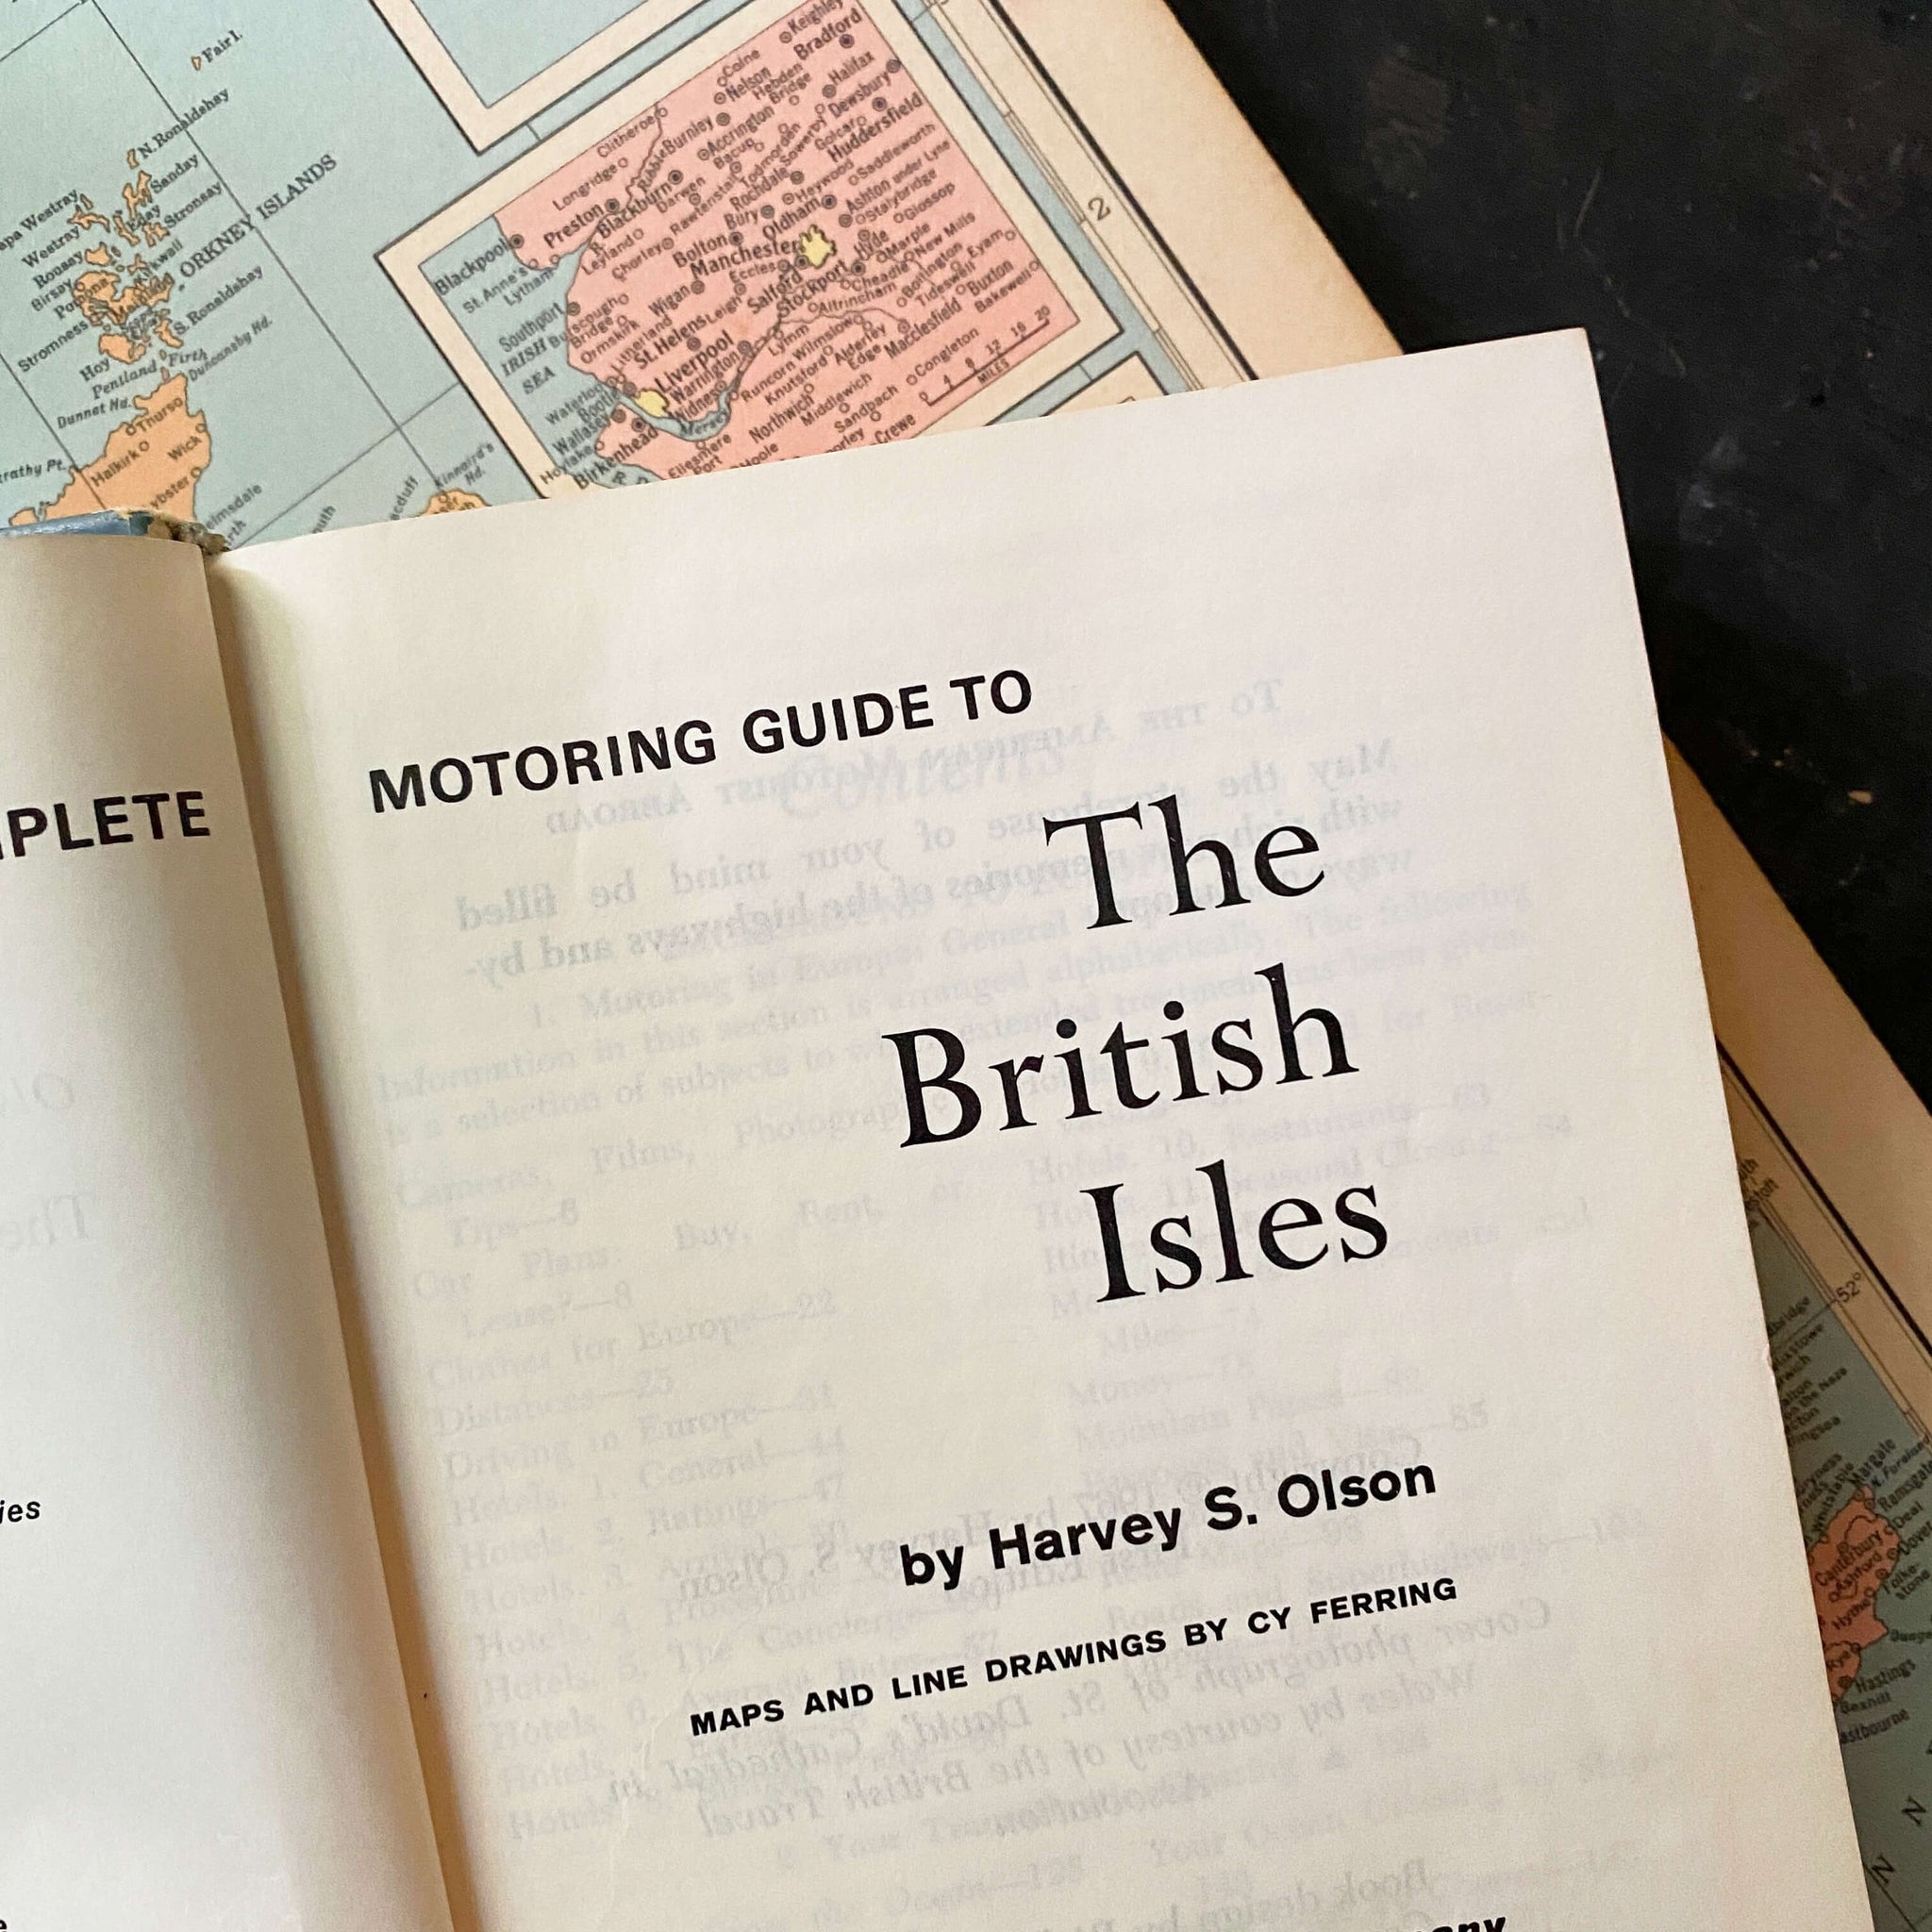 Olson's Complete Motoring Guide to The British Isles circa 1967